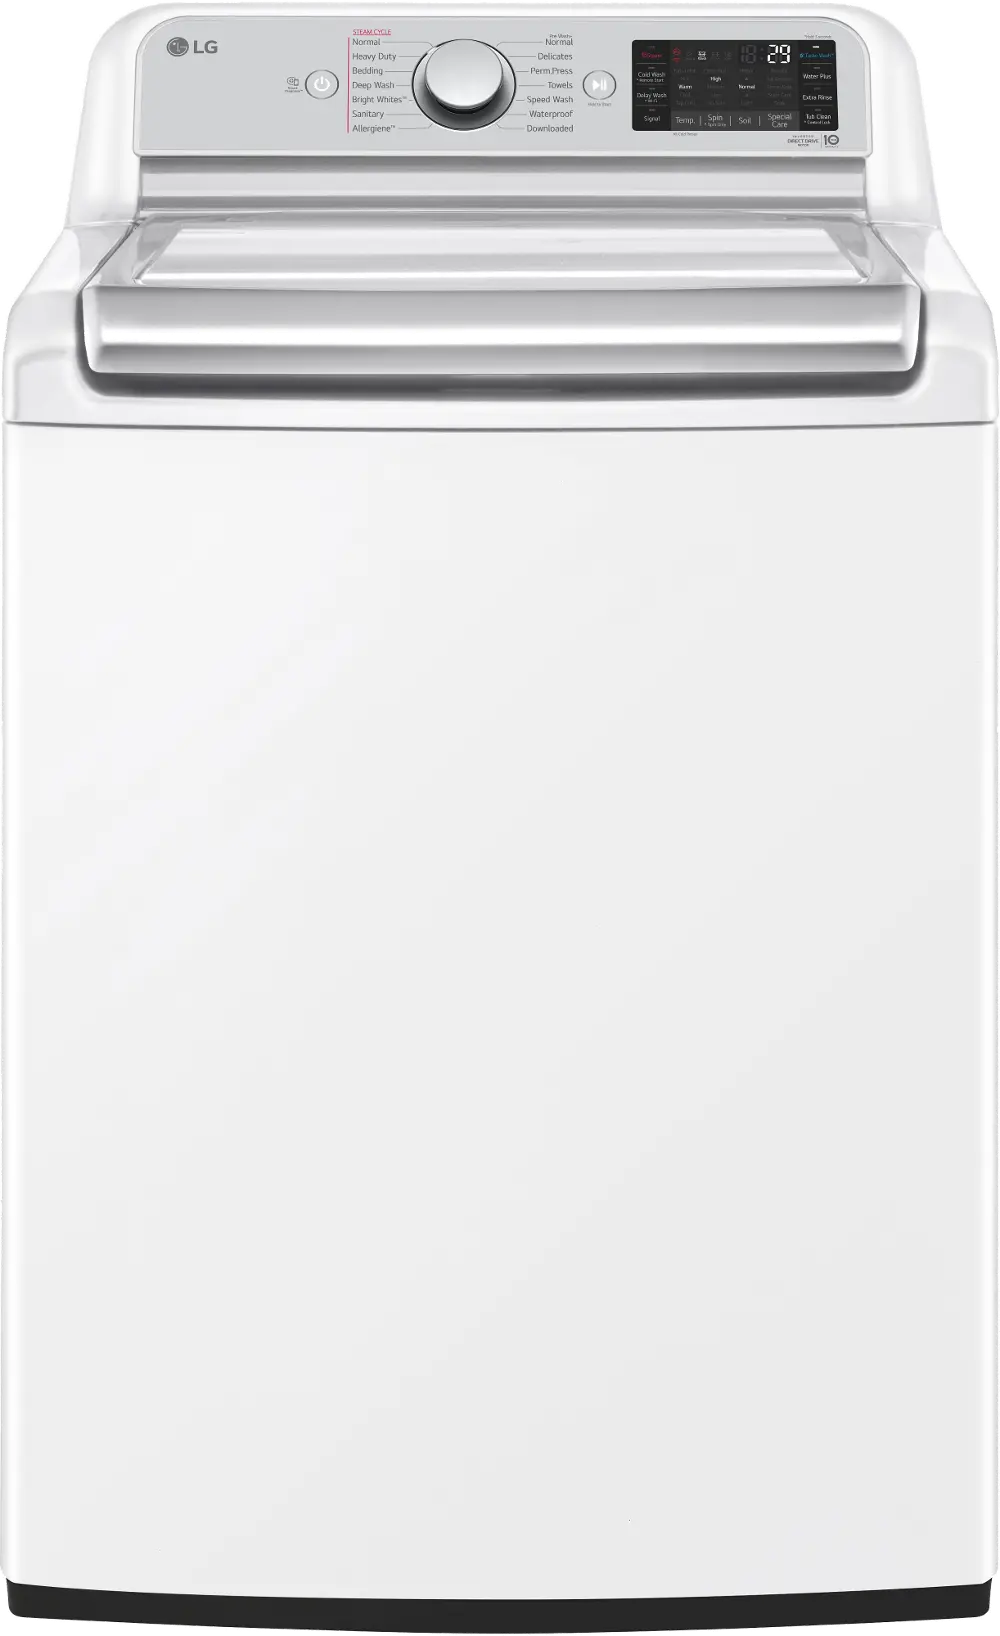 WT7900HWA LG 5.5 cu ft Top Load Washer - White, 7900W-1